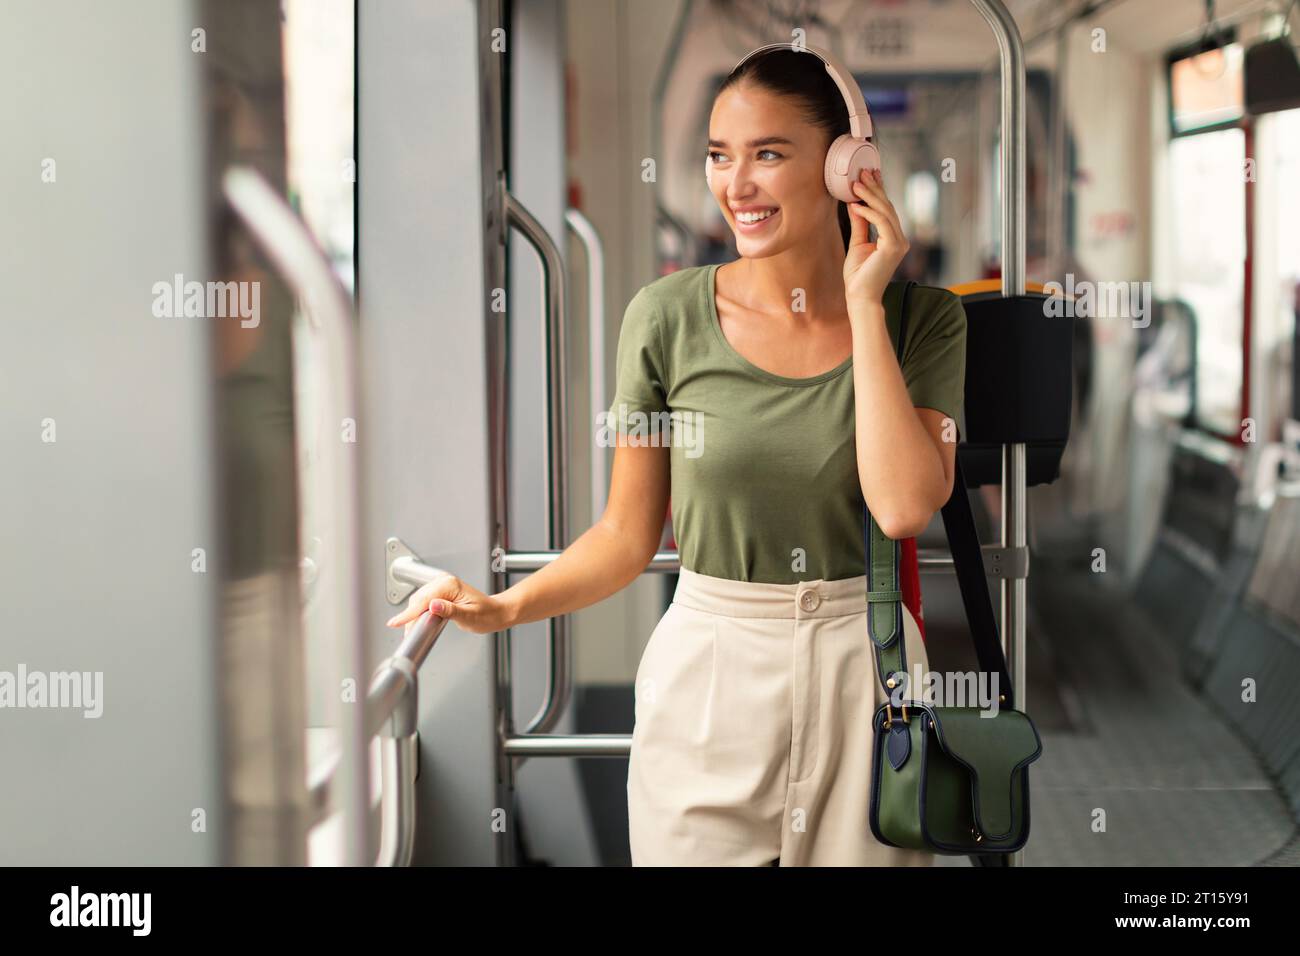 Woman immerses in music utilizing headphones traveling in city tram Stock Photo